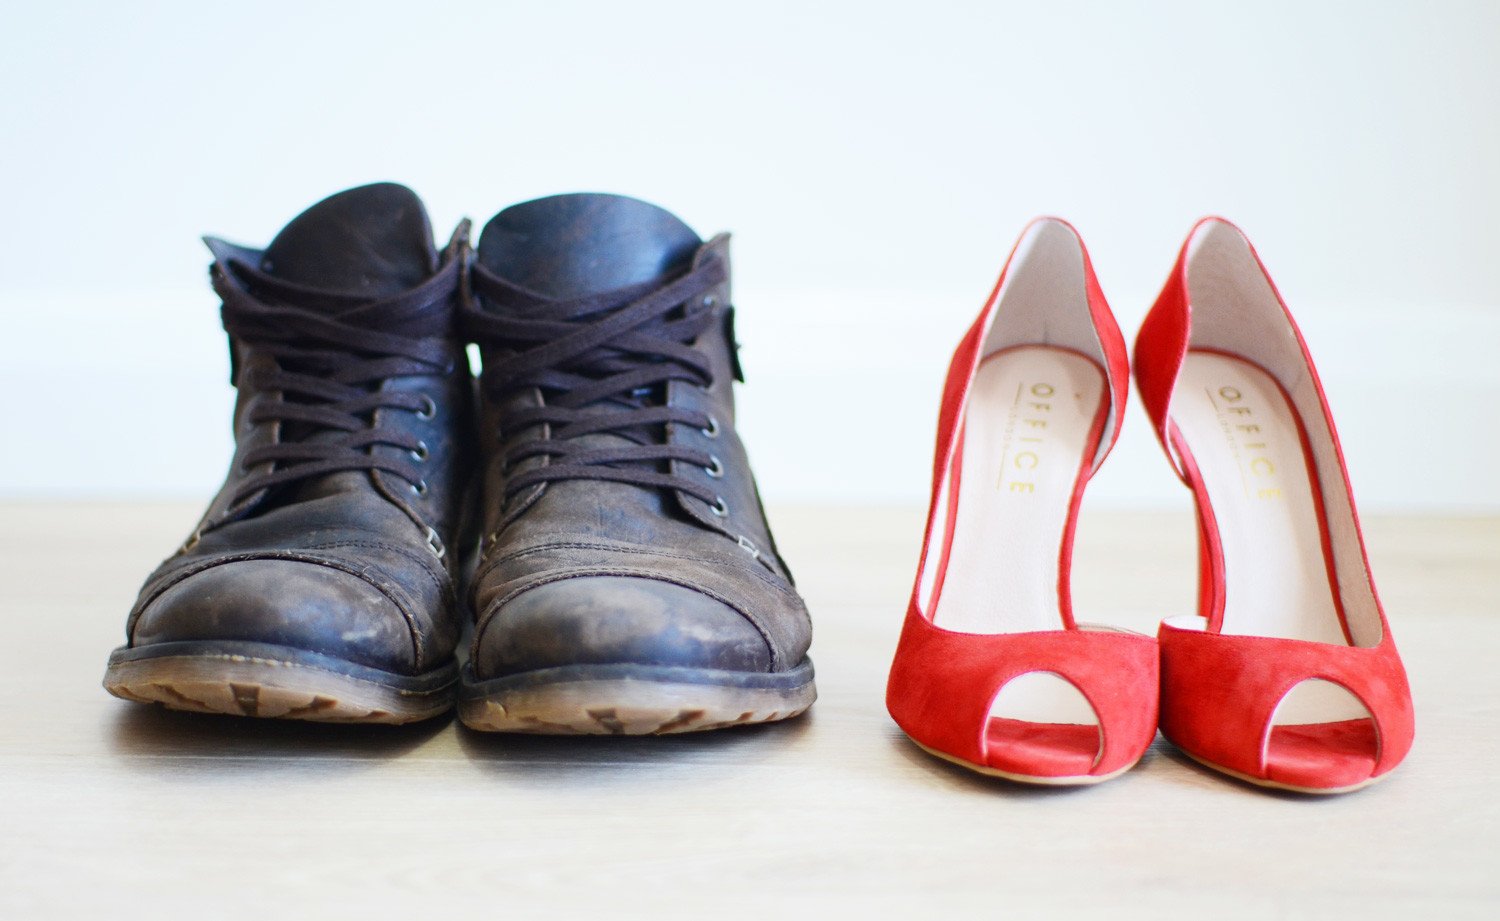 his and hers shoes: red high heels and black boots